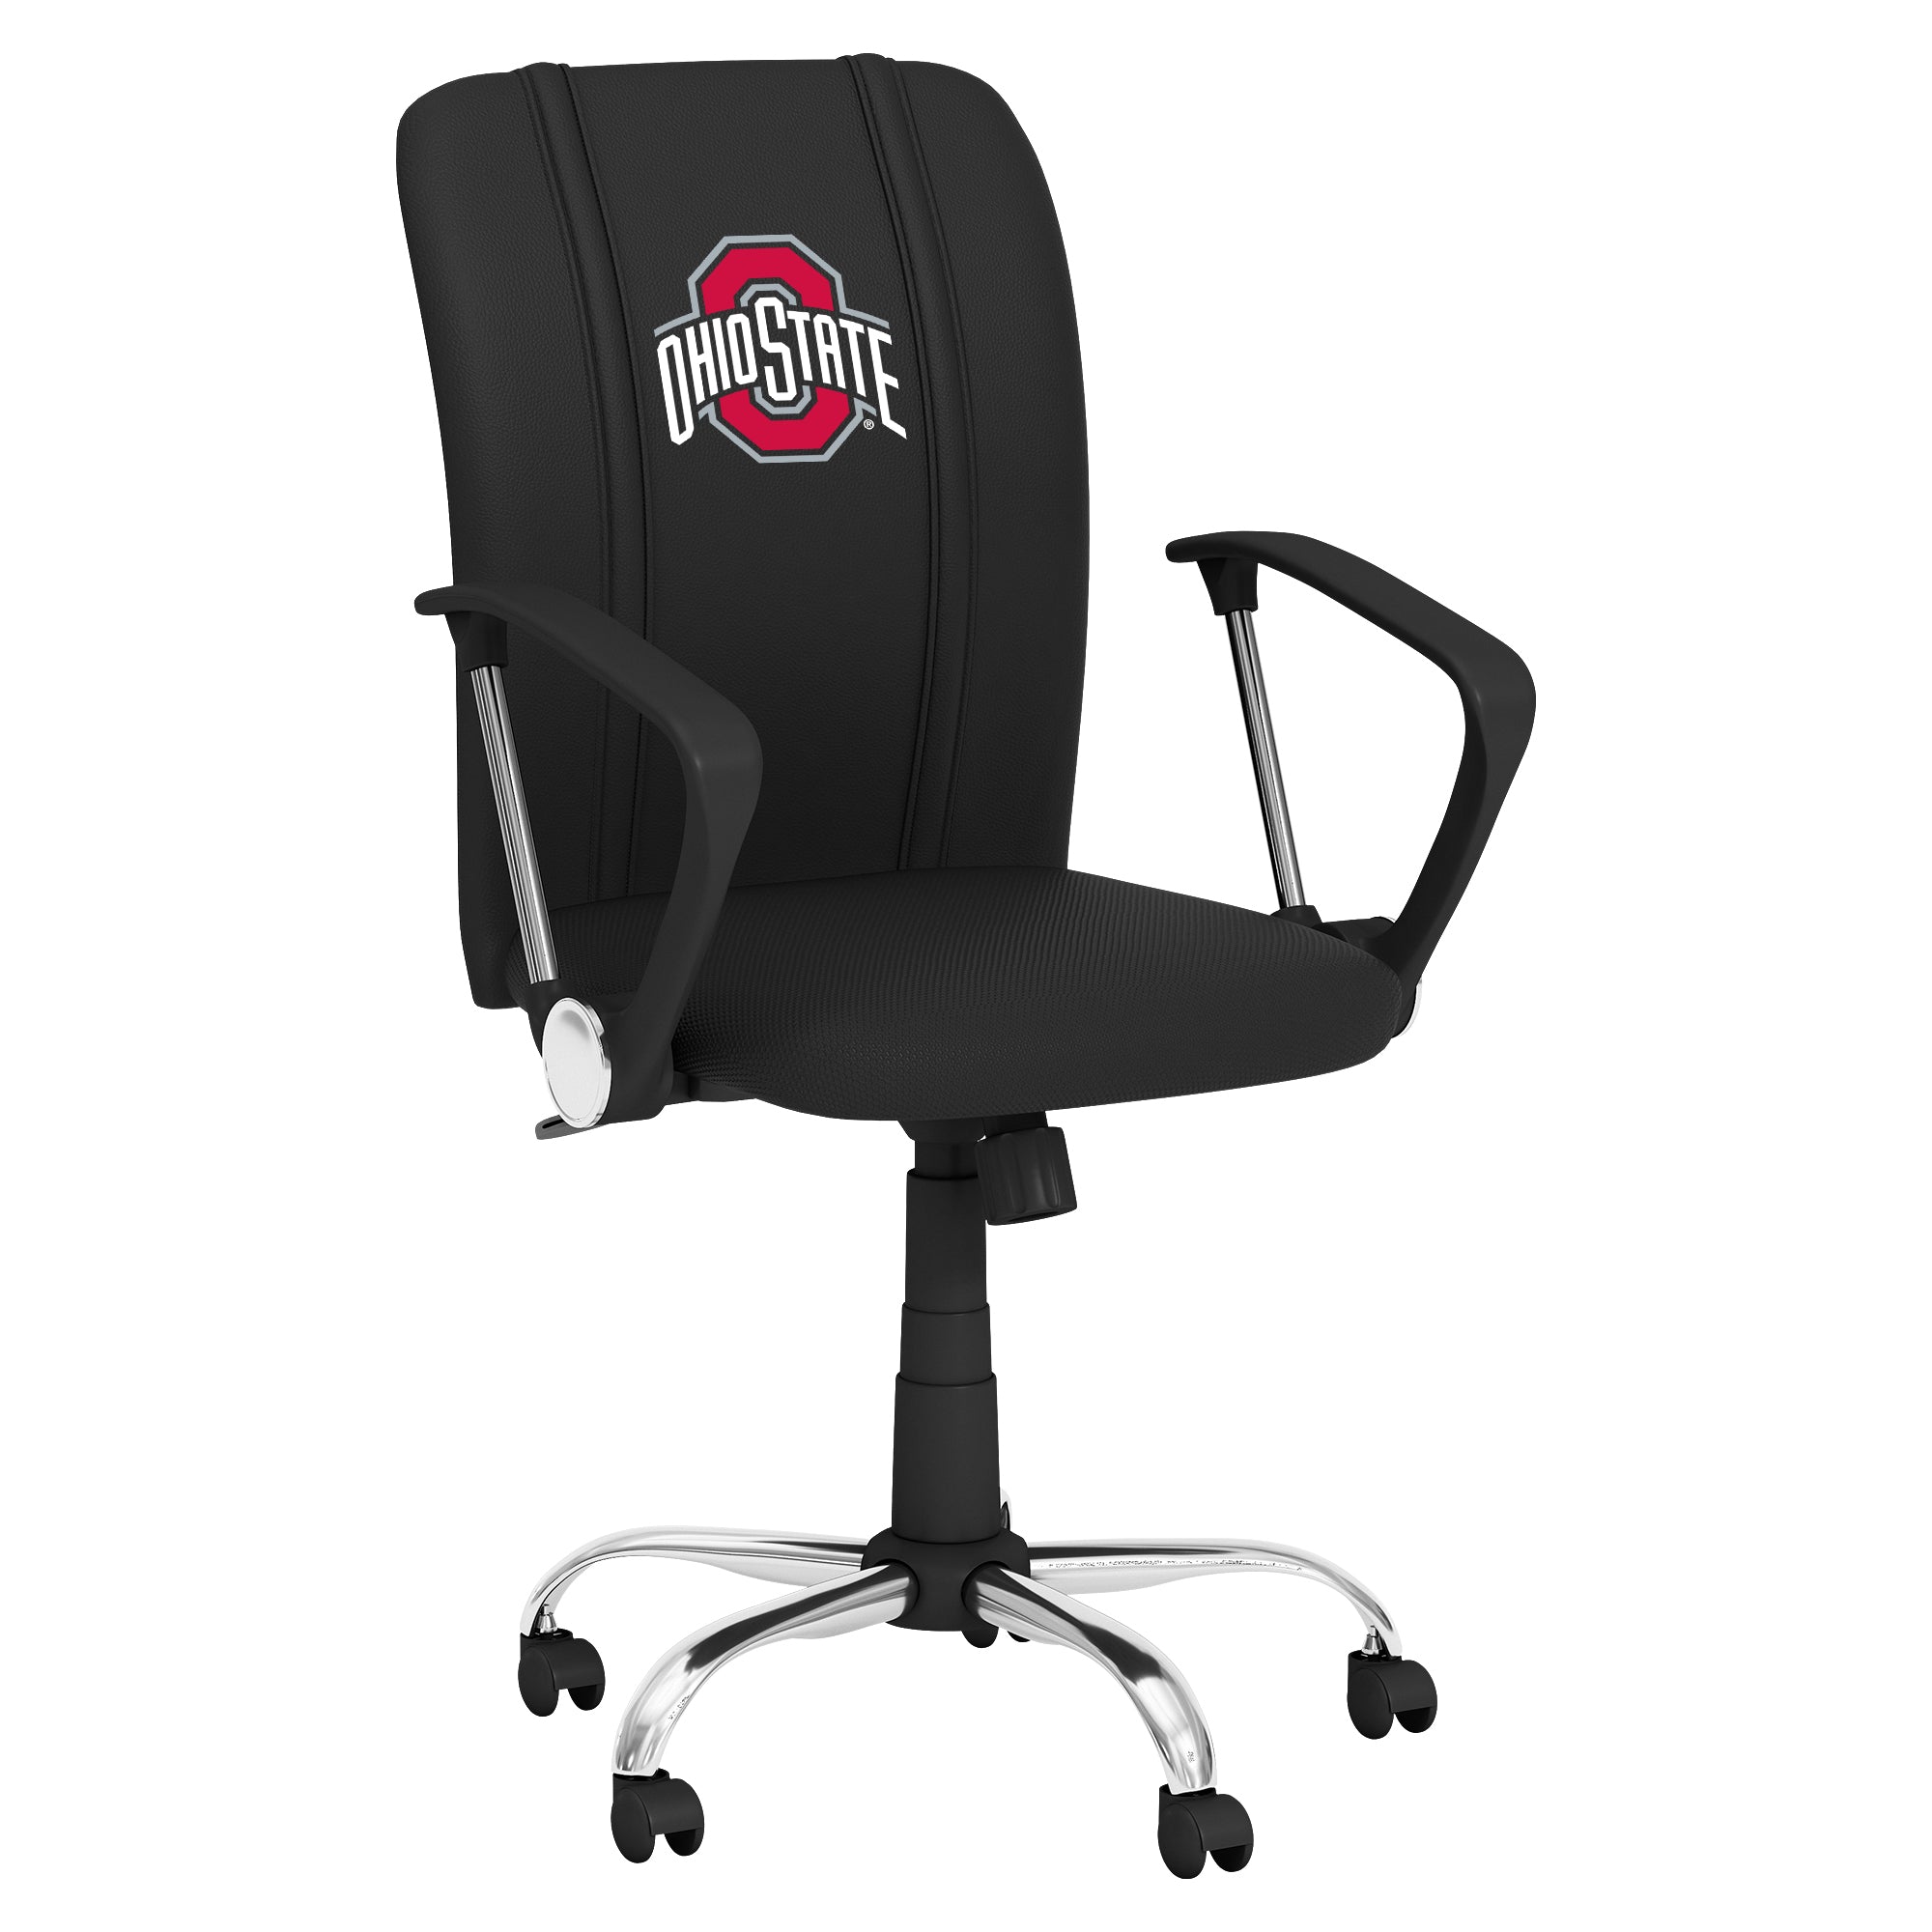 Ohio State Curve Task Chair with Ohio State Primary Logo